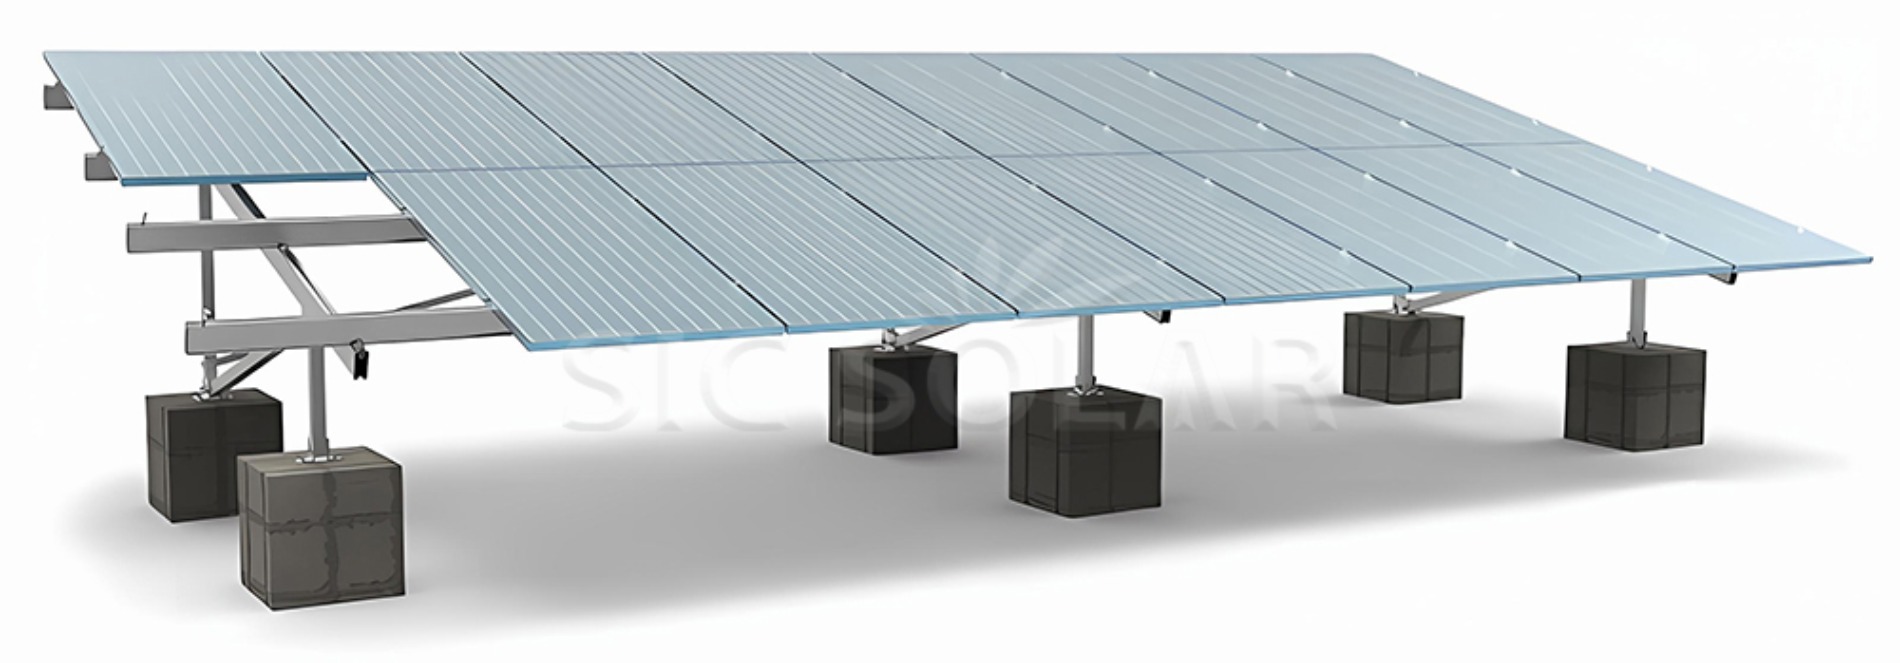 Solar ground mounting structure